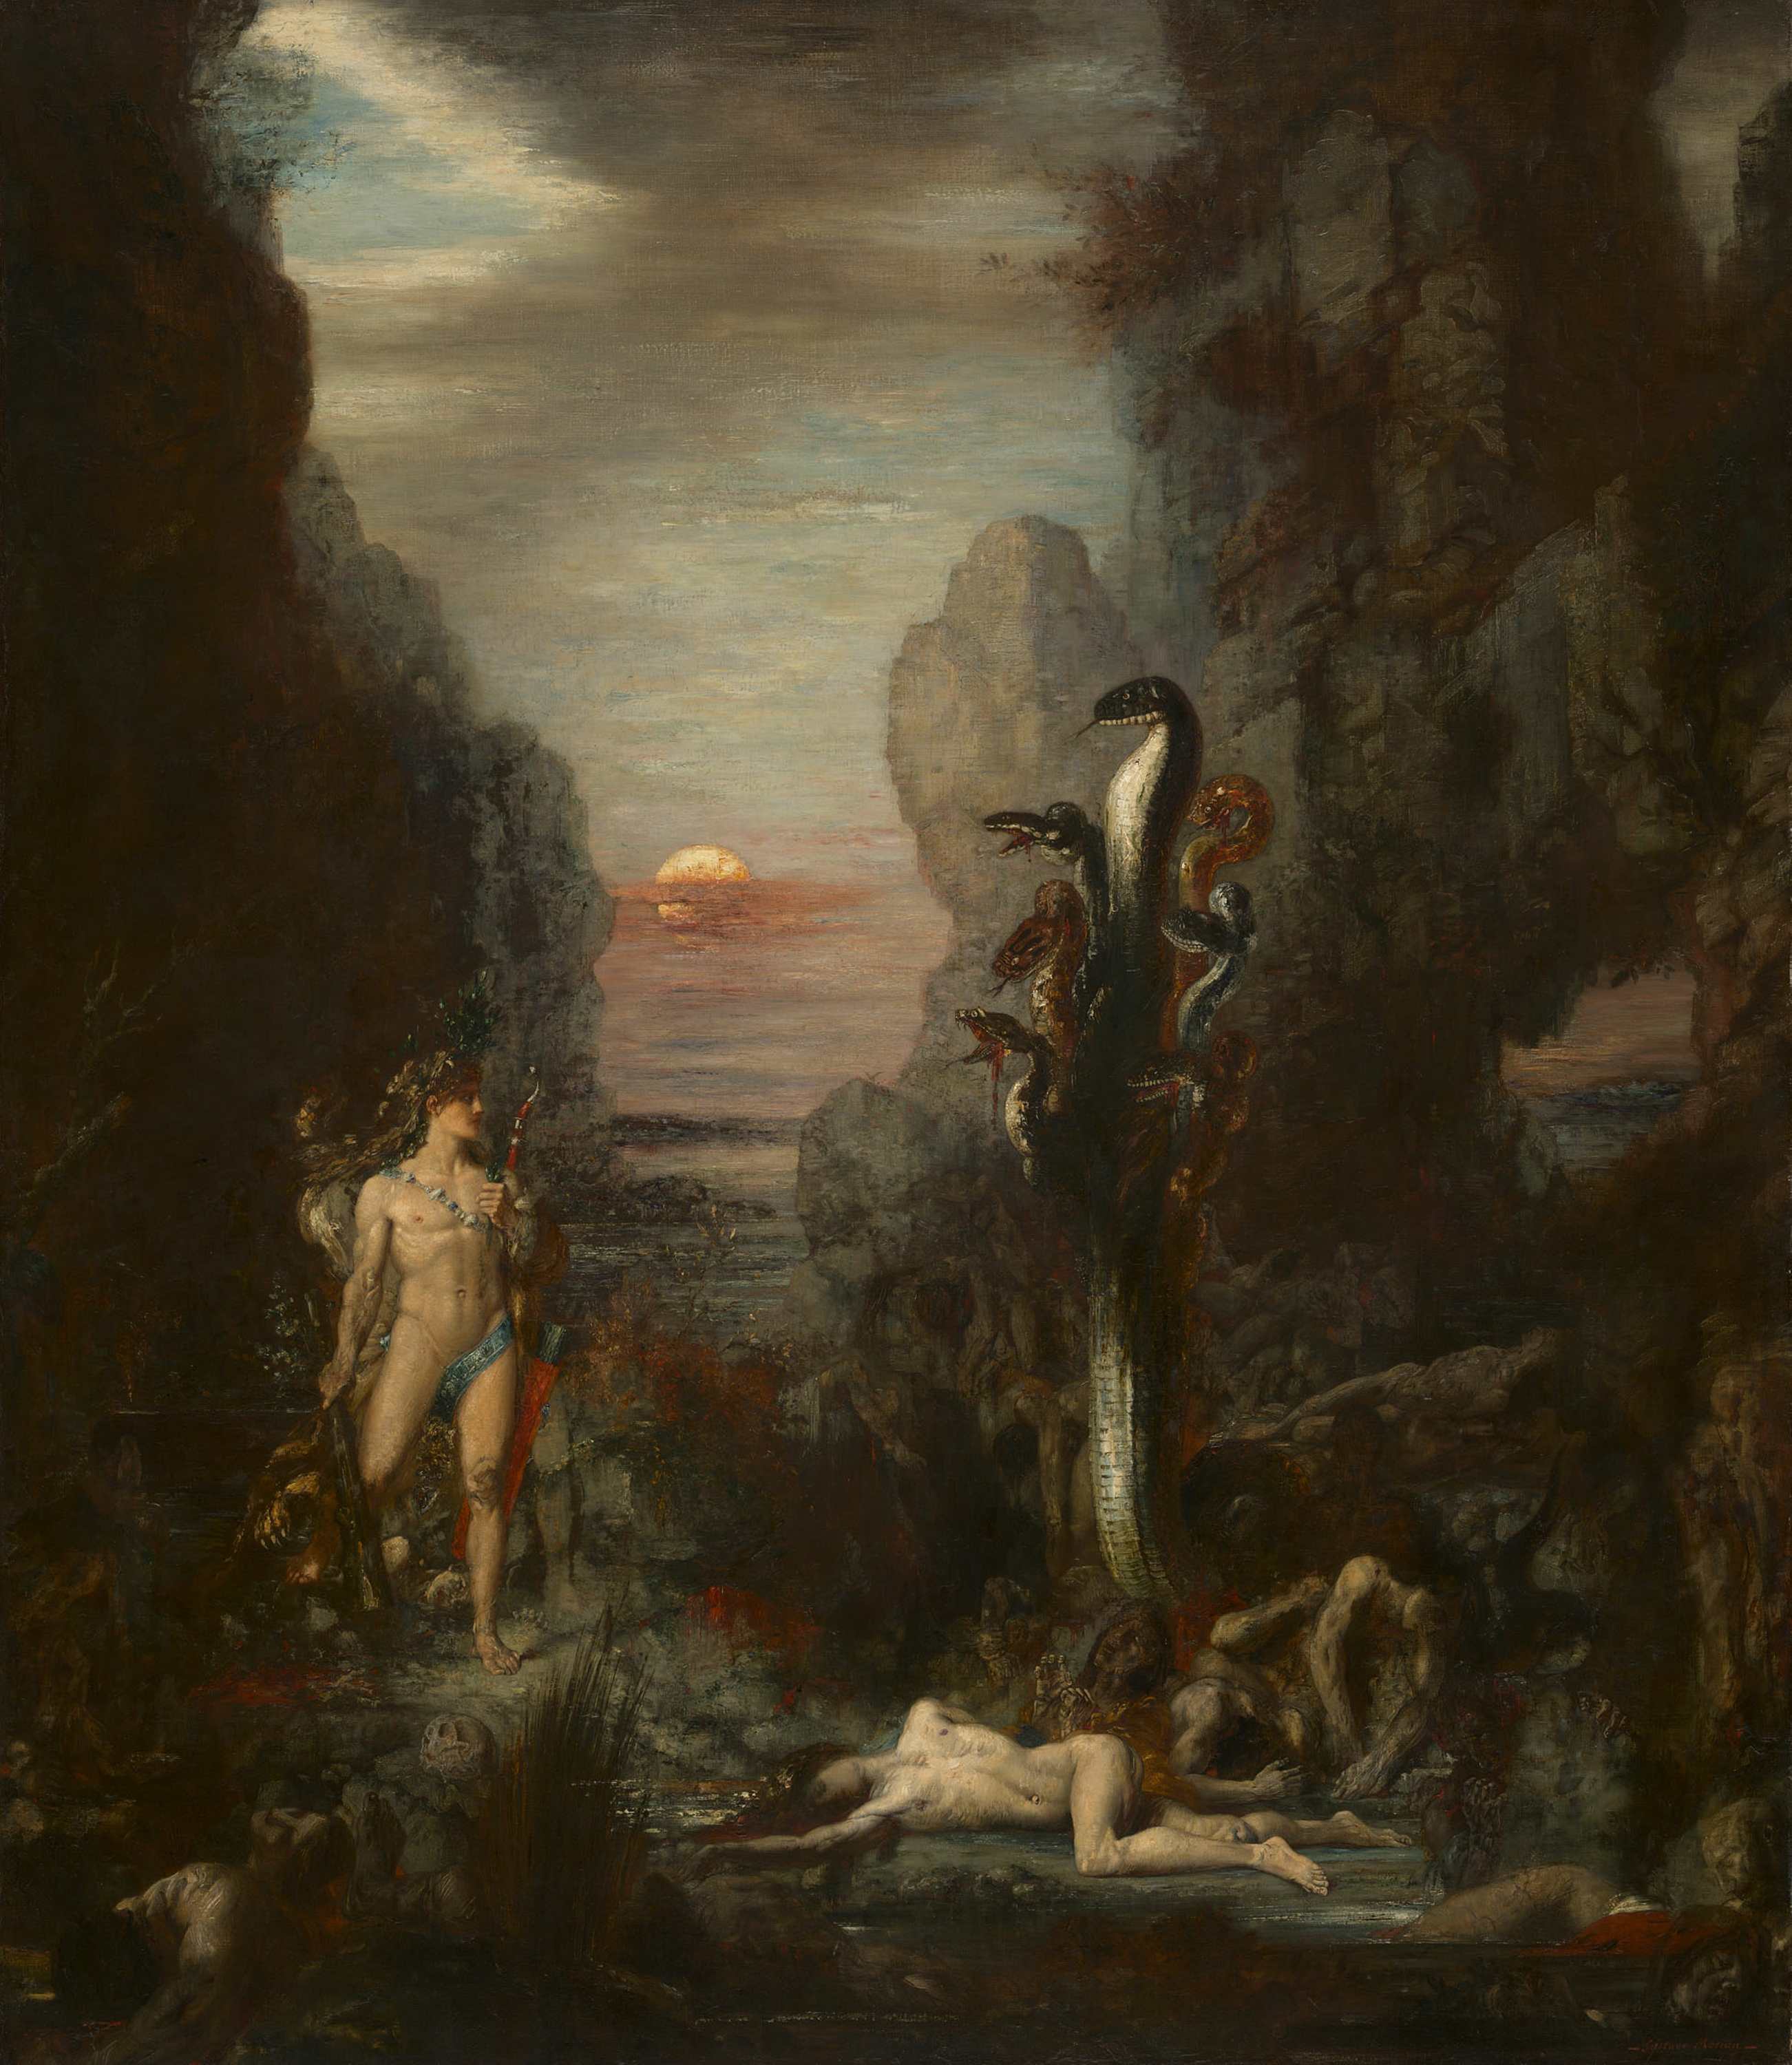 Hercules and the Lernaean Hydra by Gustave Moreau - 1875/76 - 179.3 × 154 cm Art Institute of Chicago